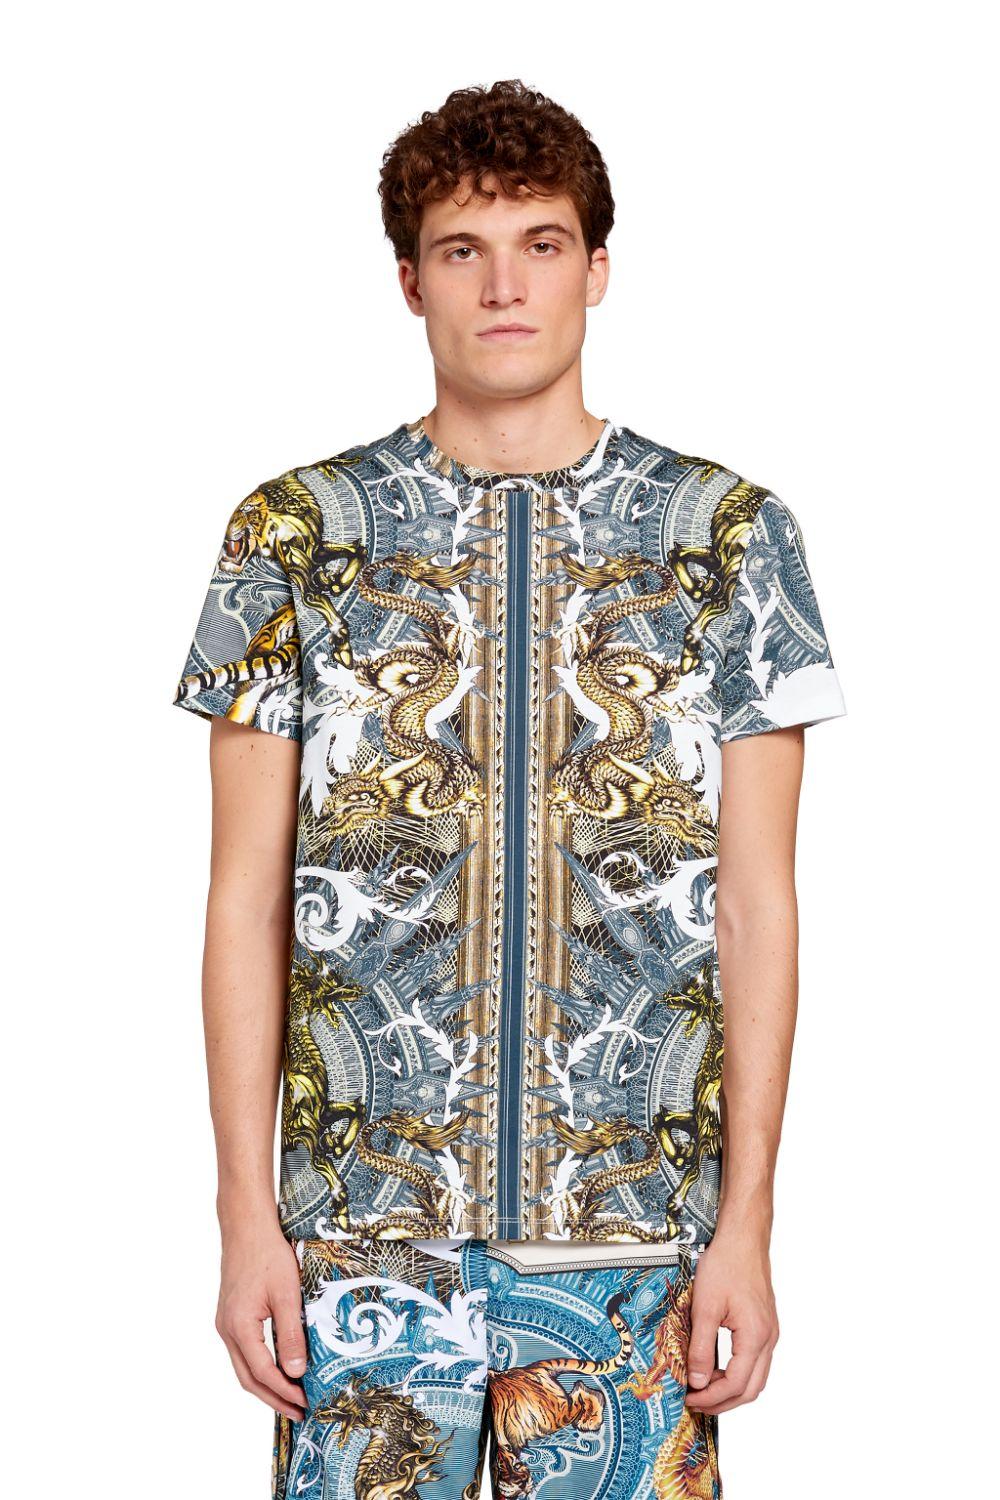 Roberto Cavalli Cotton Printed T-shirt in Blue for Men - Lyst